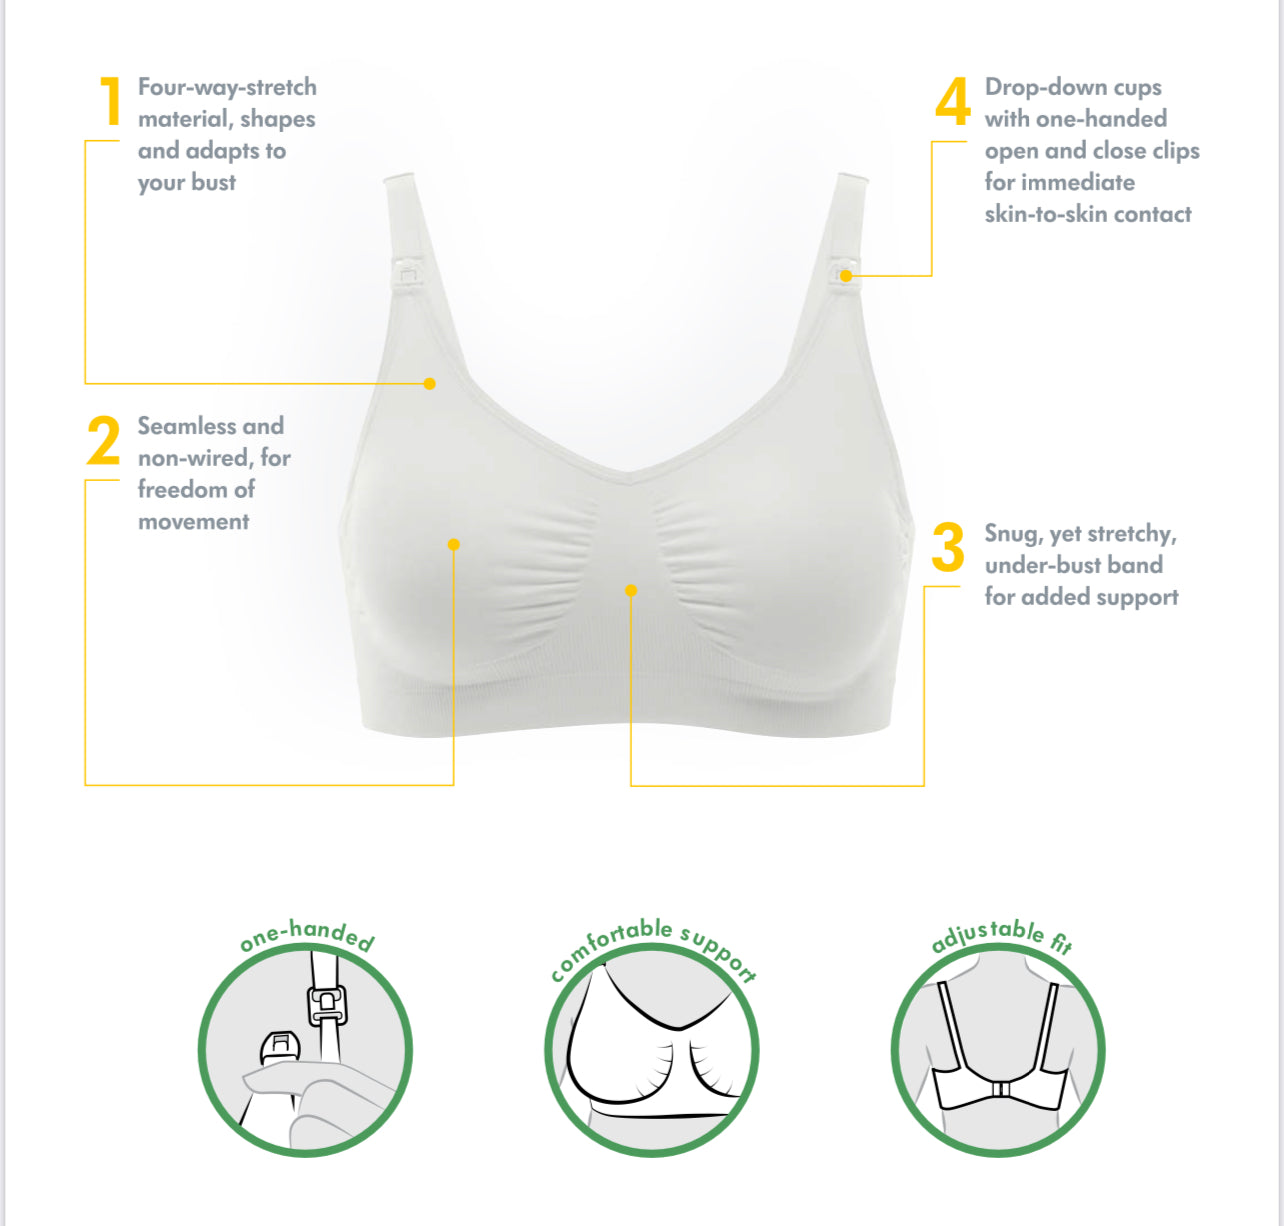 Medela Maternity and Nursing Comfort Bra, Non Wire and Seamless